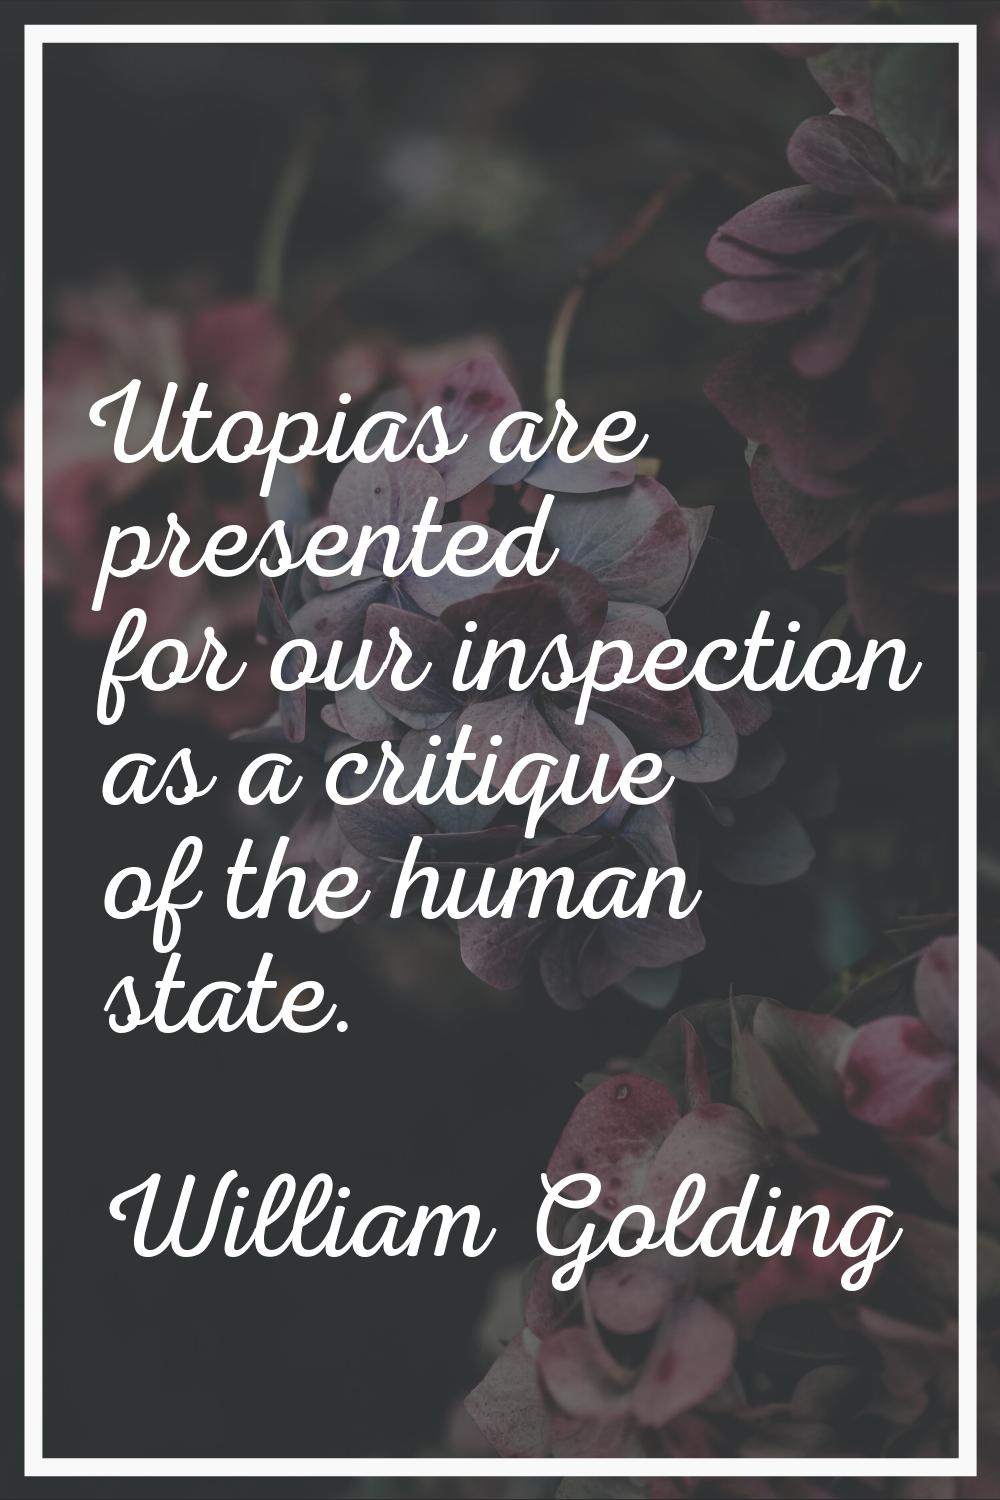 Utopias are presented for our inspection as a critique of the human state.